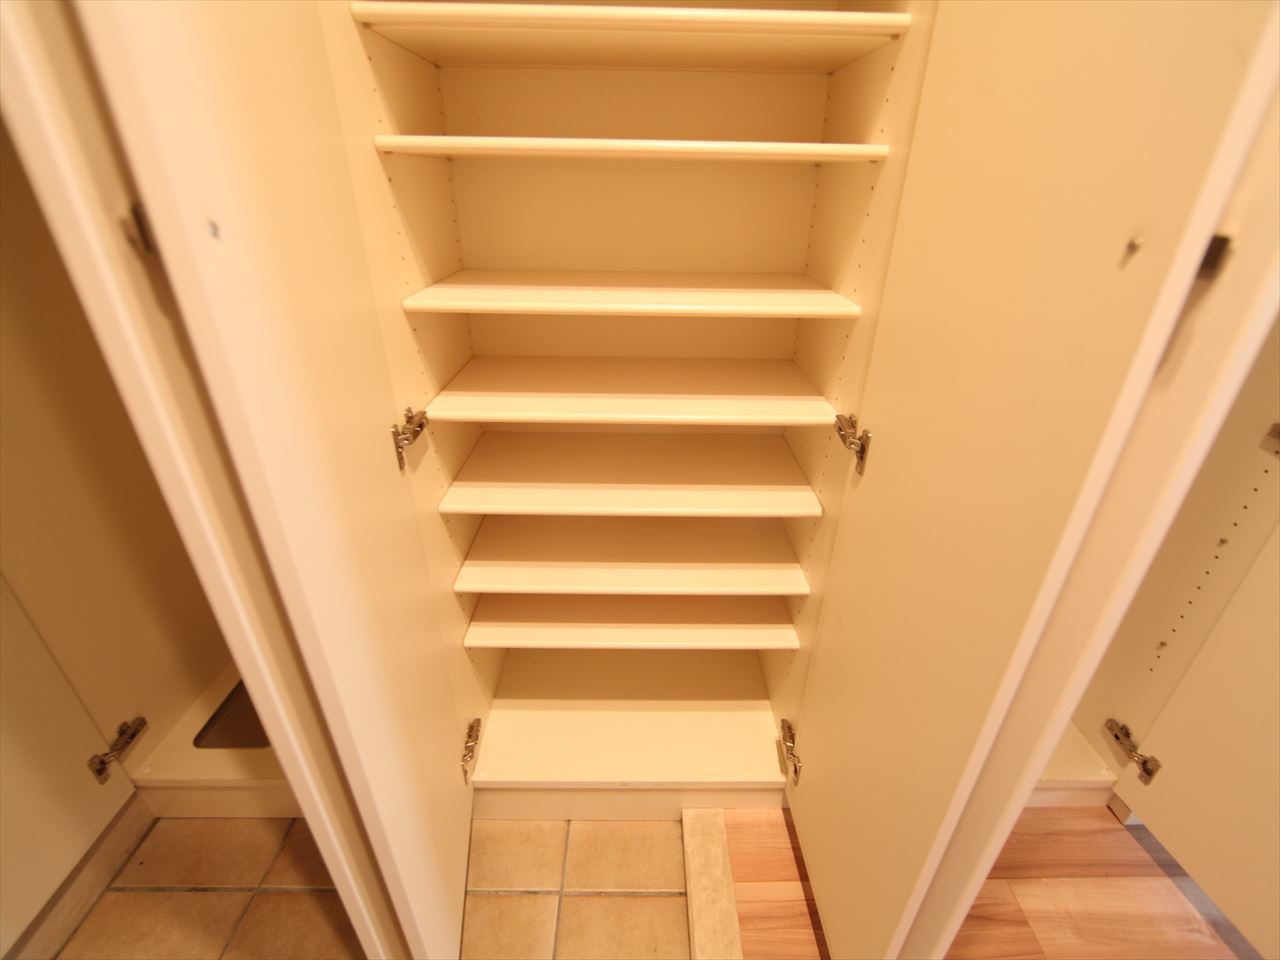 Entrance. Entrance storage Shoes with a box (storage rich have)